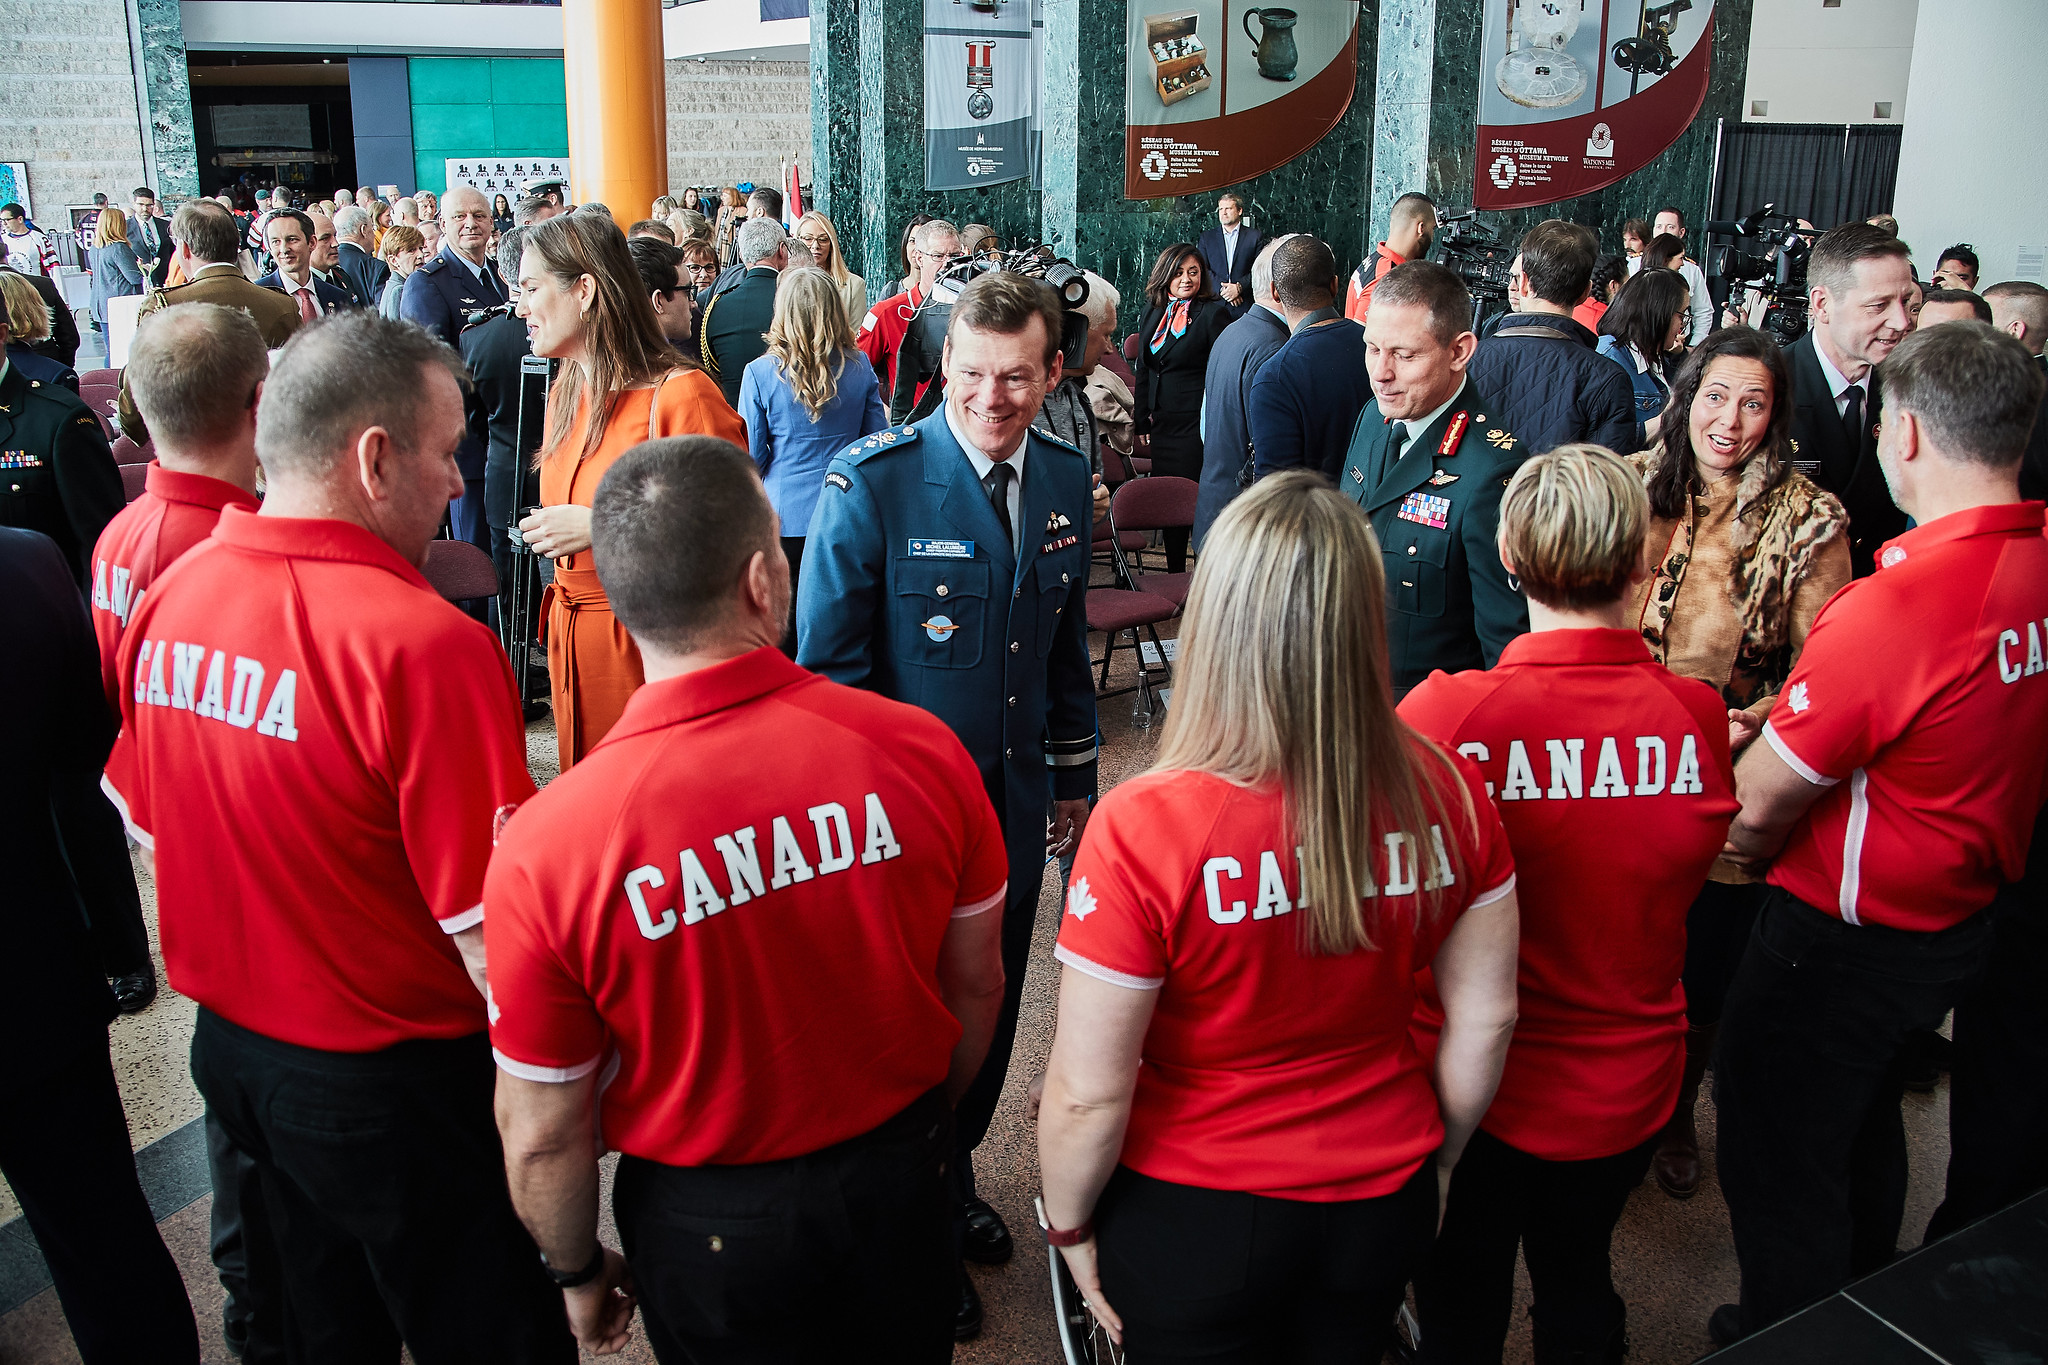 See the biographies of all the Team Canada athletes participating in the upcoming Invictus Games.